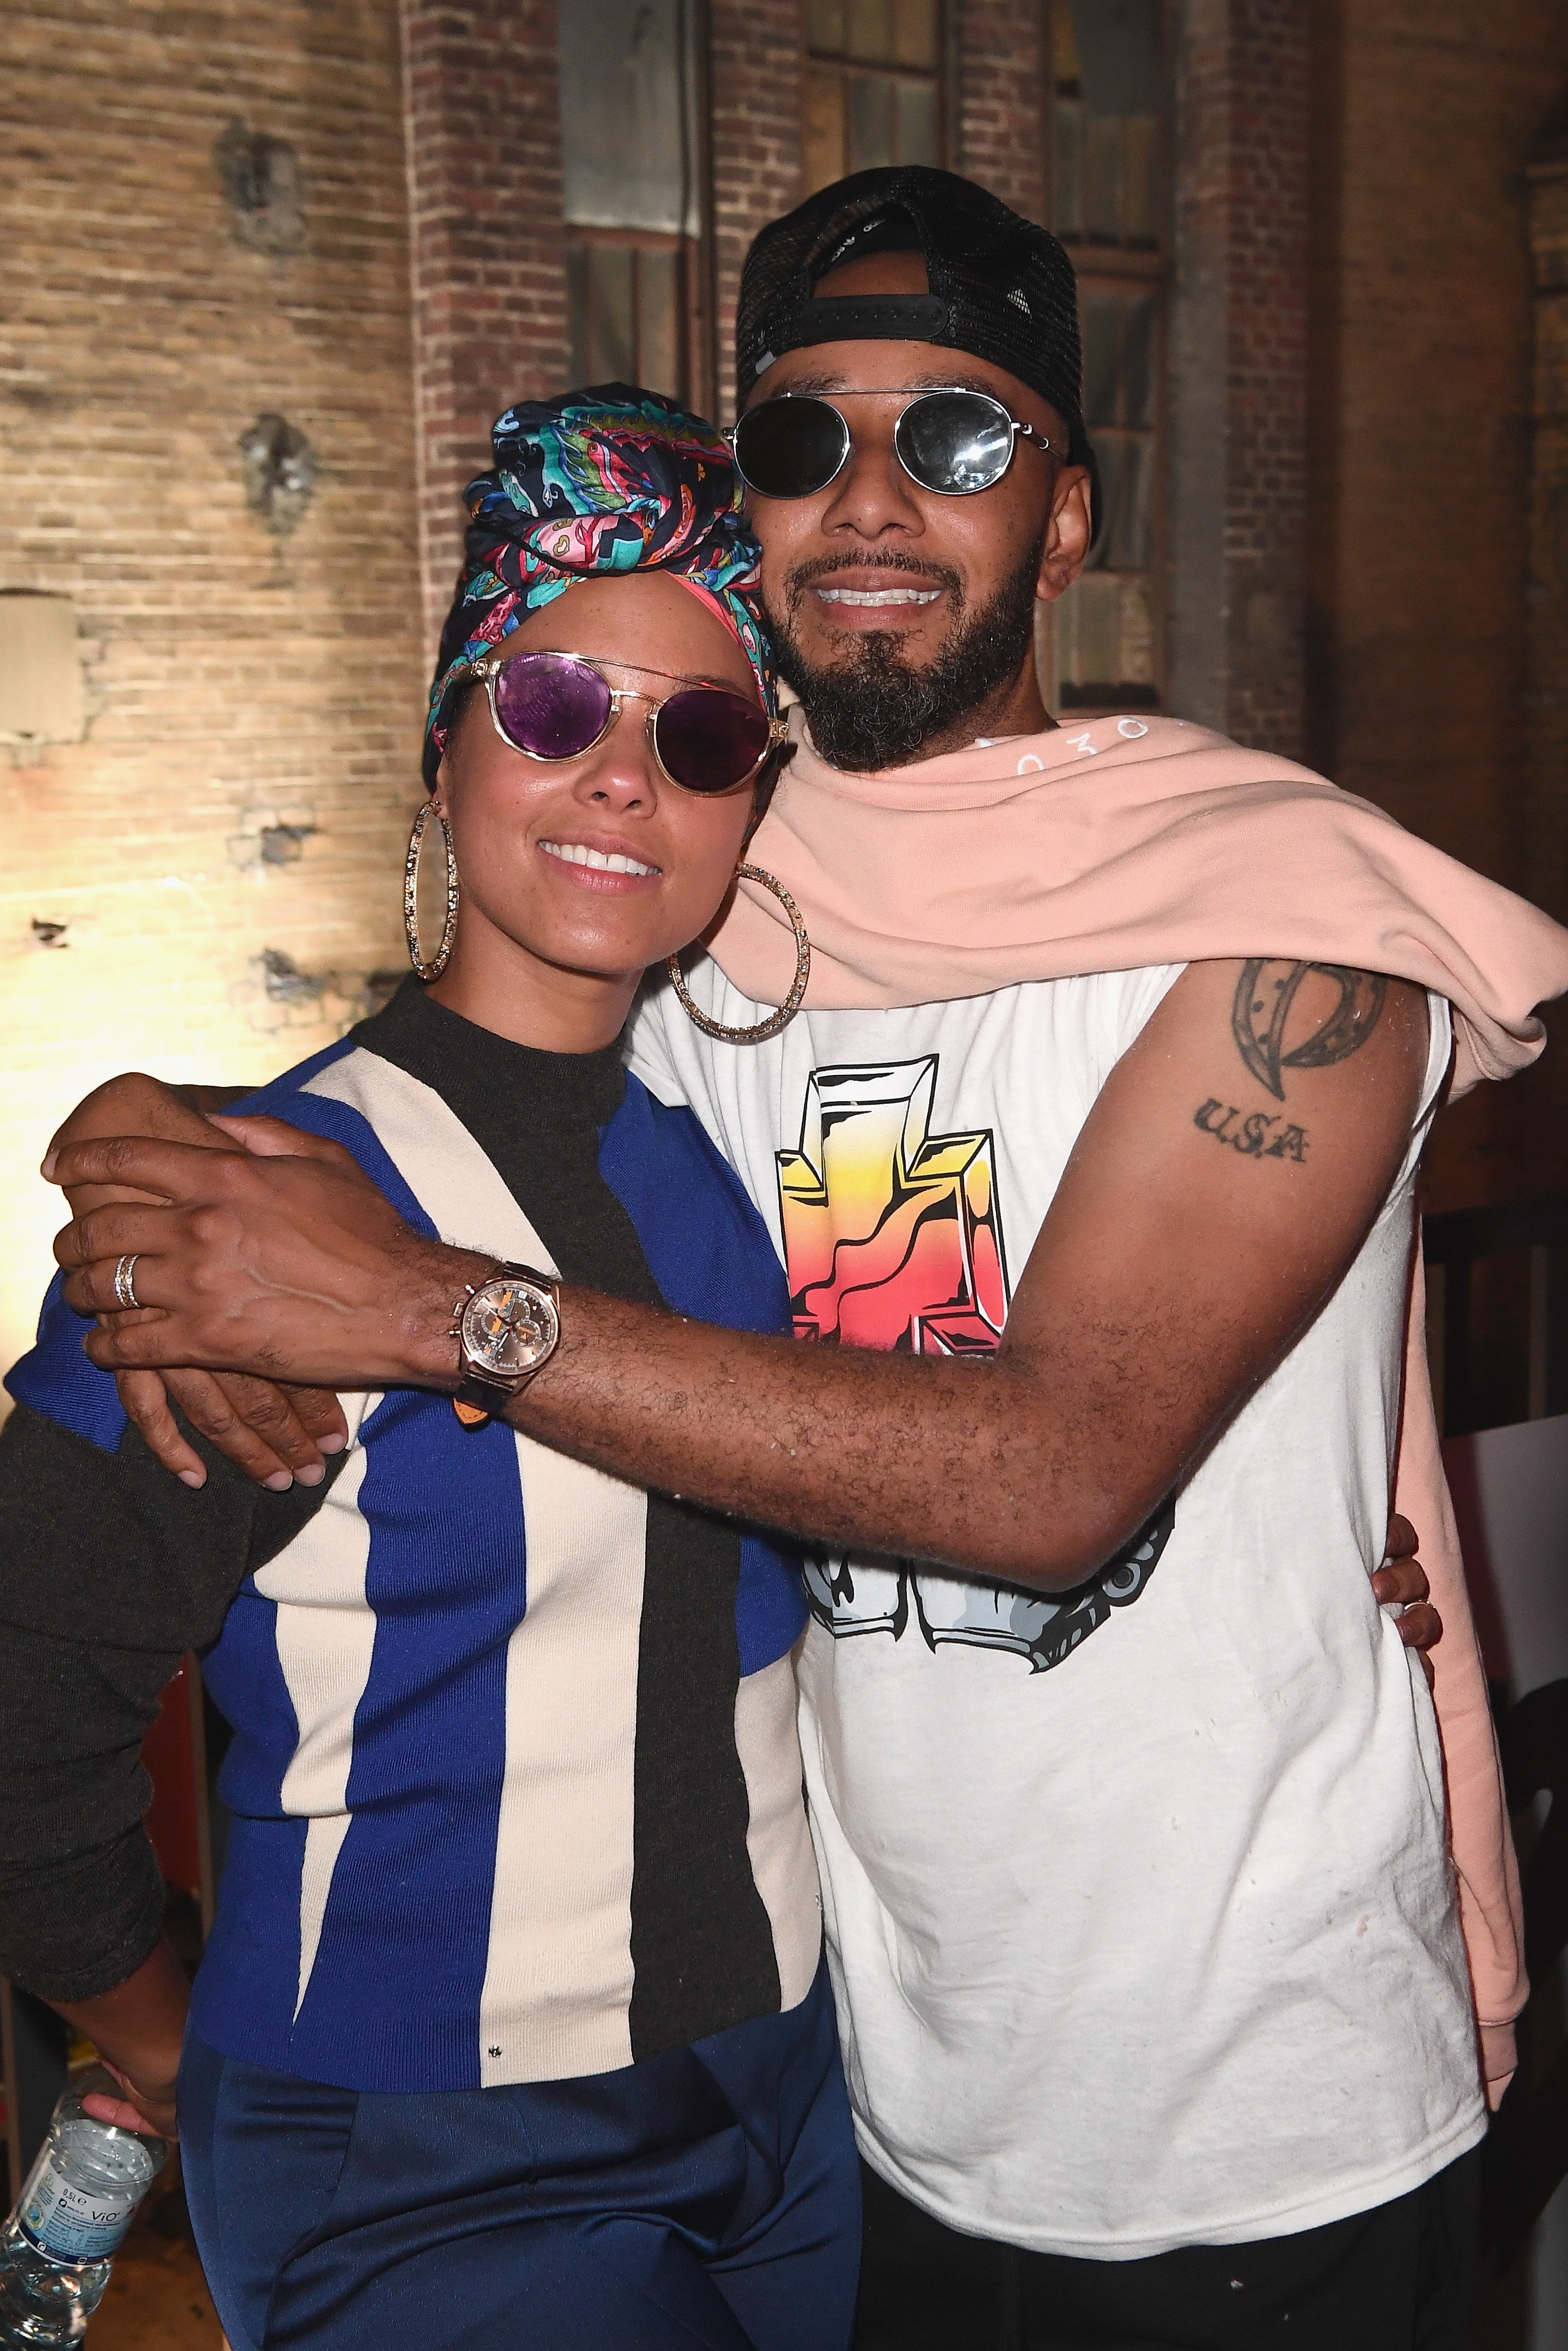 Alicia Keys and Swizz Beats at a Bacardi event in Germany in June 2017. | Photo: Getty Images